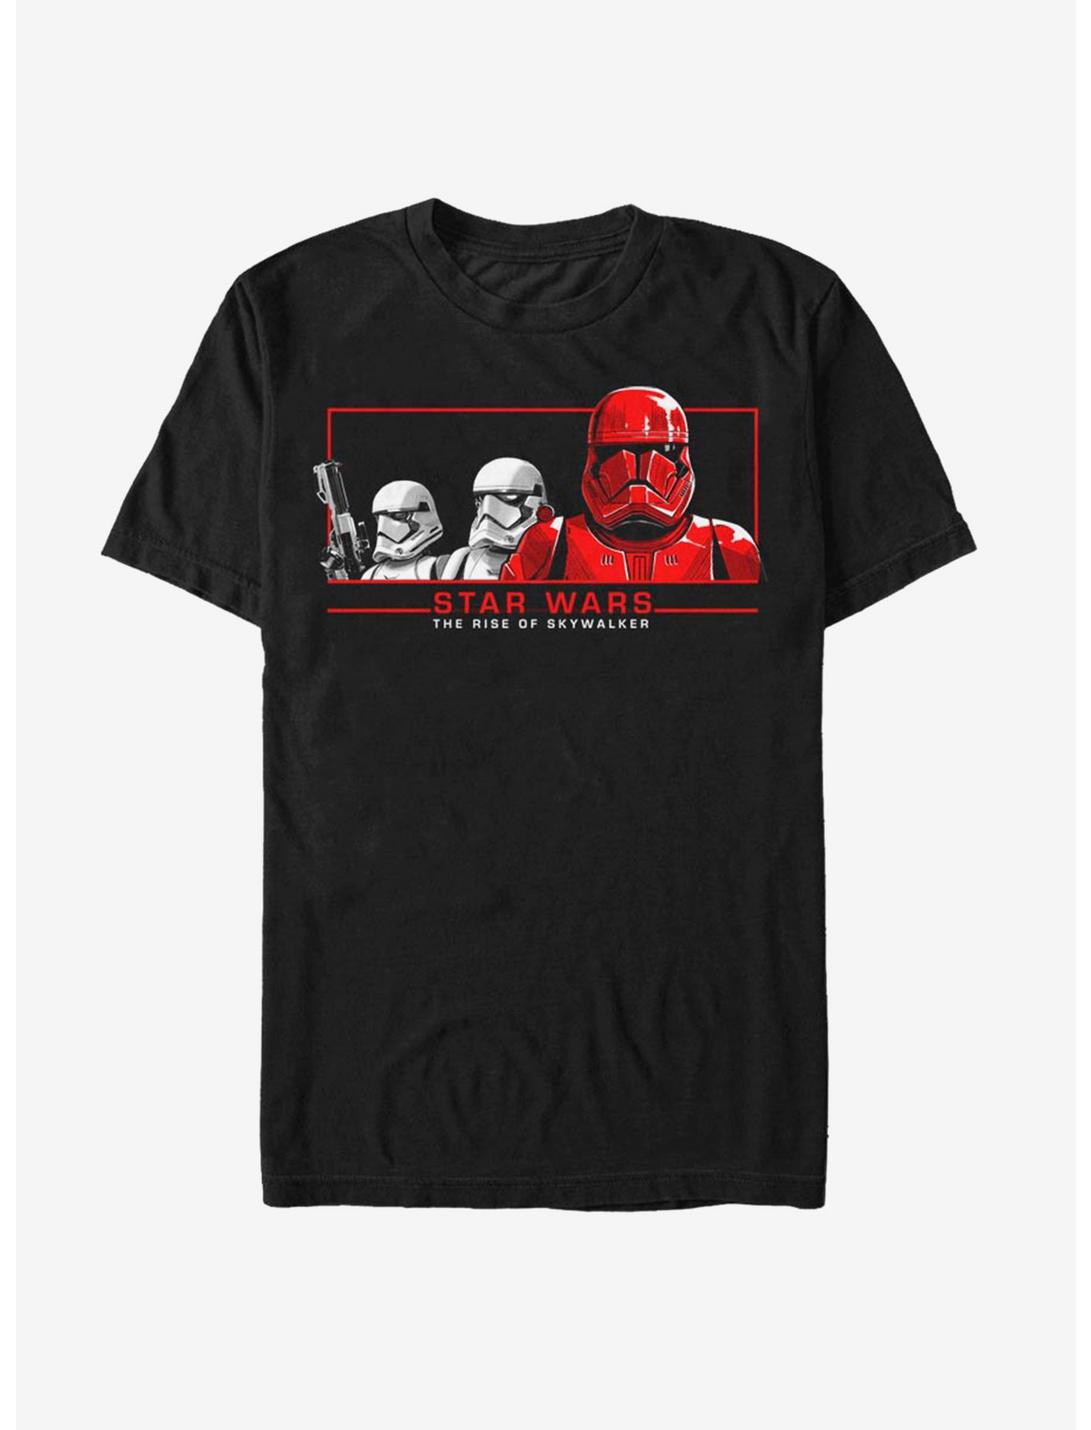 Star Wars: The Rise of Skywalker Red and Pals T-Shirt, BLACK, hi-res